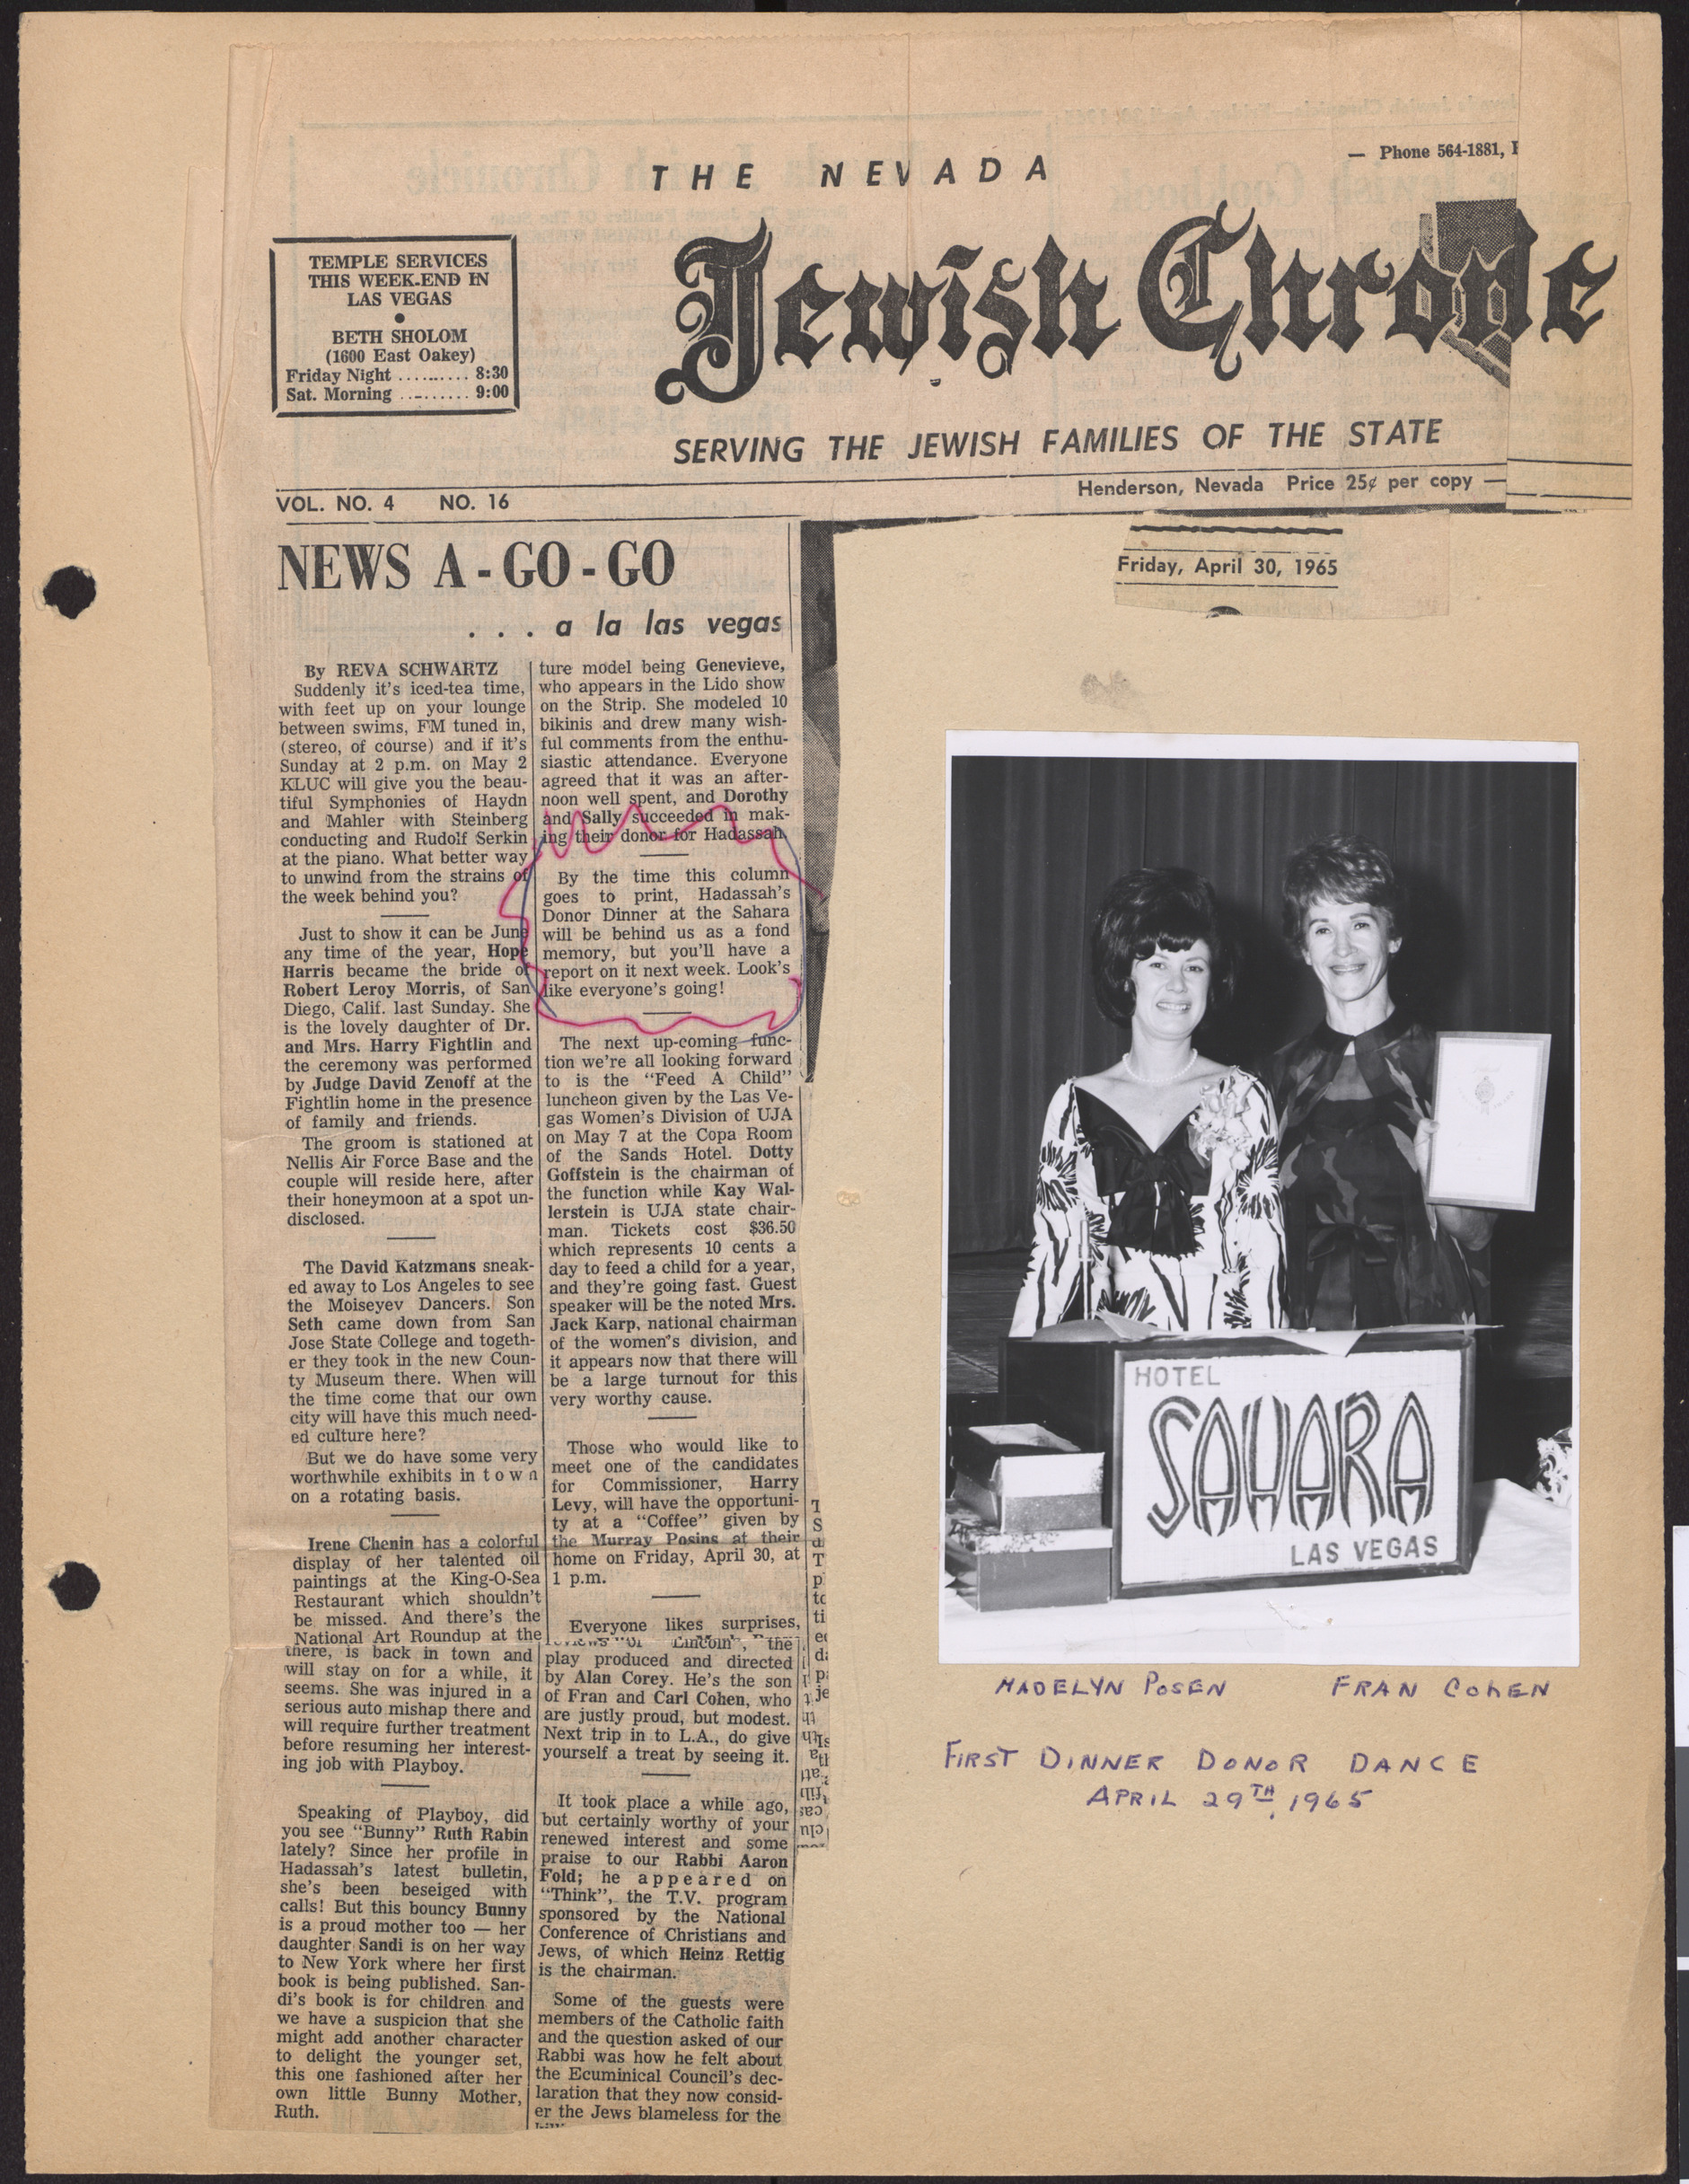 Newspaper clipping, News A-Go-Go, The Nevada Jewish Chronicle, April 30, 1965, and Photograph, Madelyn Posin and Fran Cohen at Dinner Dance, April 29, 1965